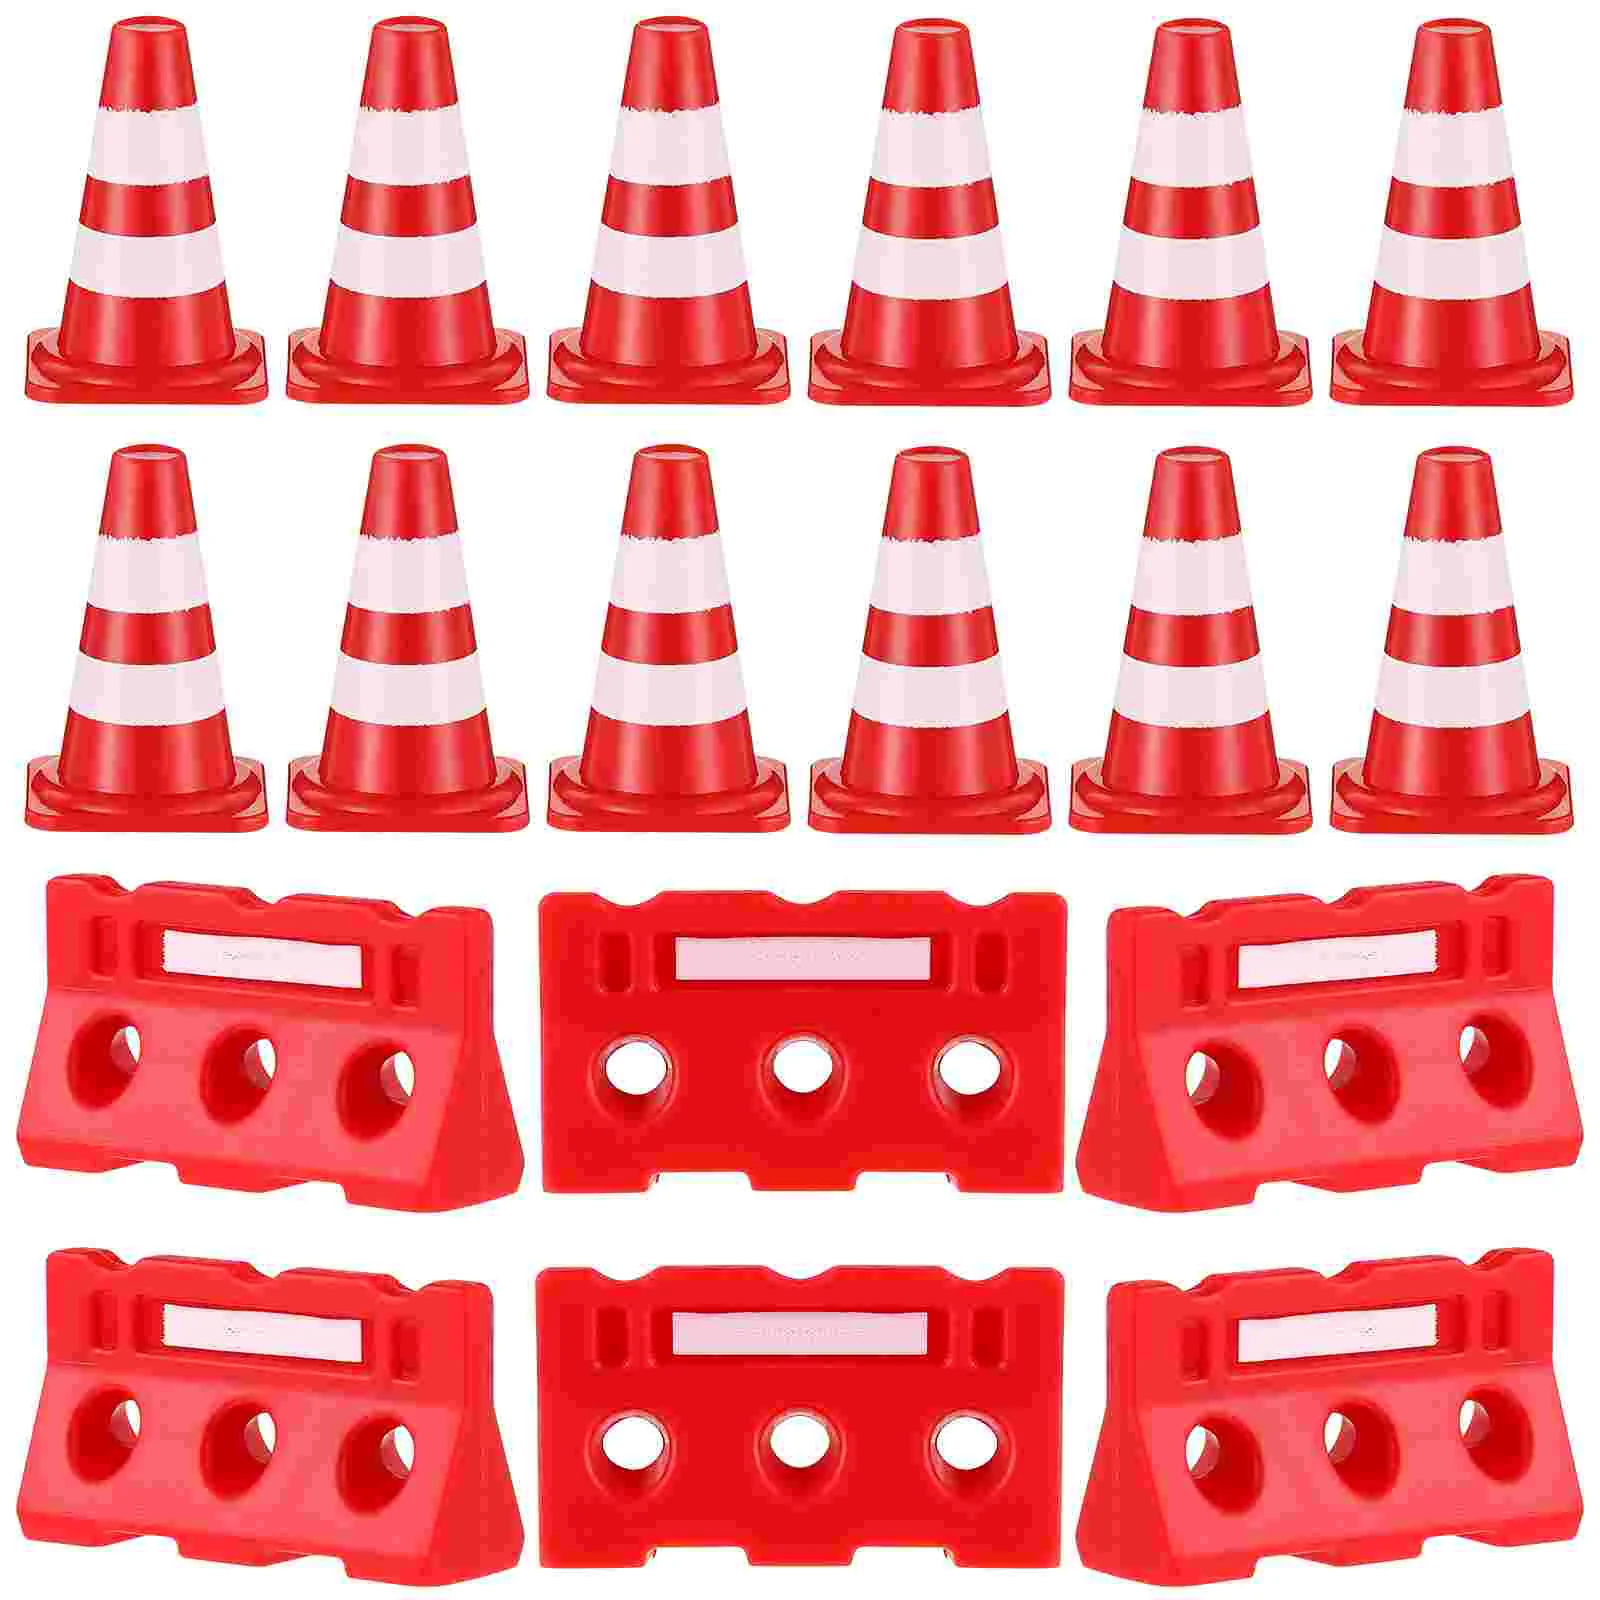 

Tiny Traffic Cones Fences Traffic Road Signs Traffic Cones Fences Toys Sand Table Ornaments Theme Party Favors New